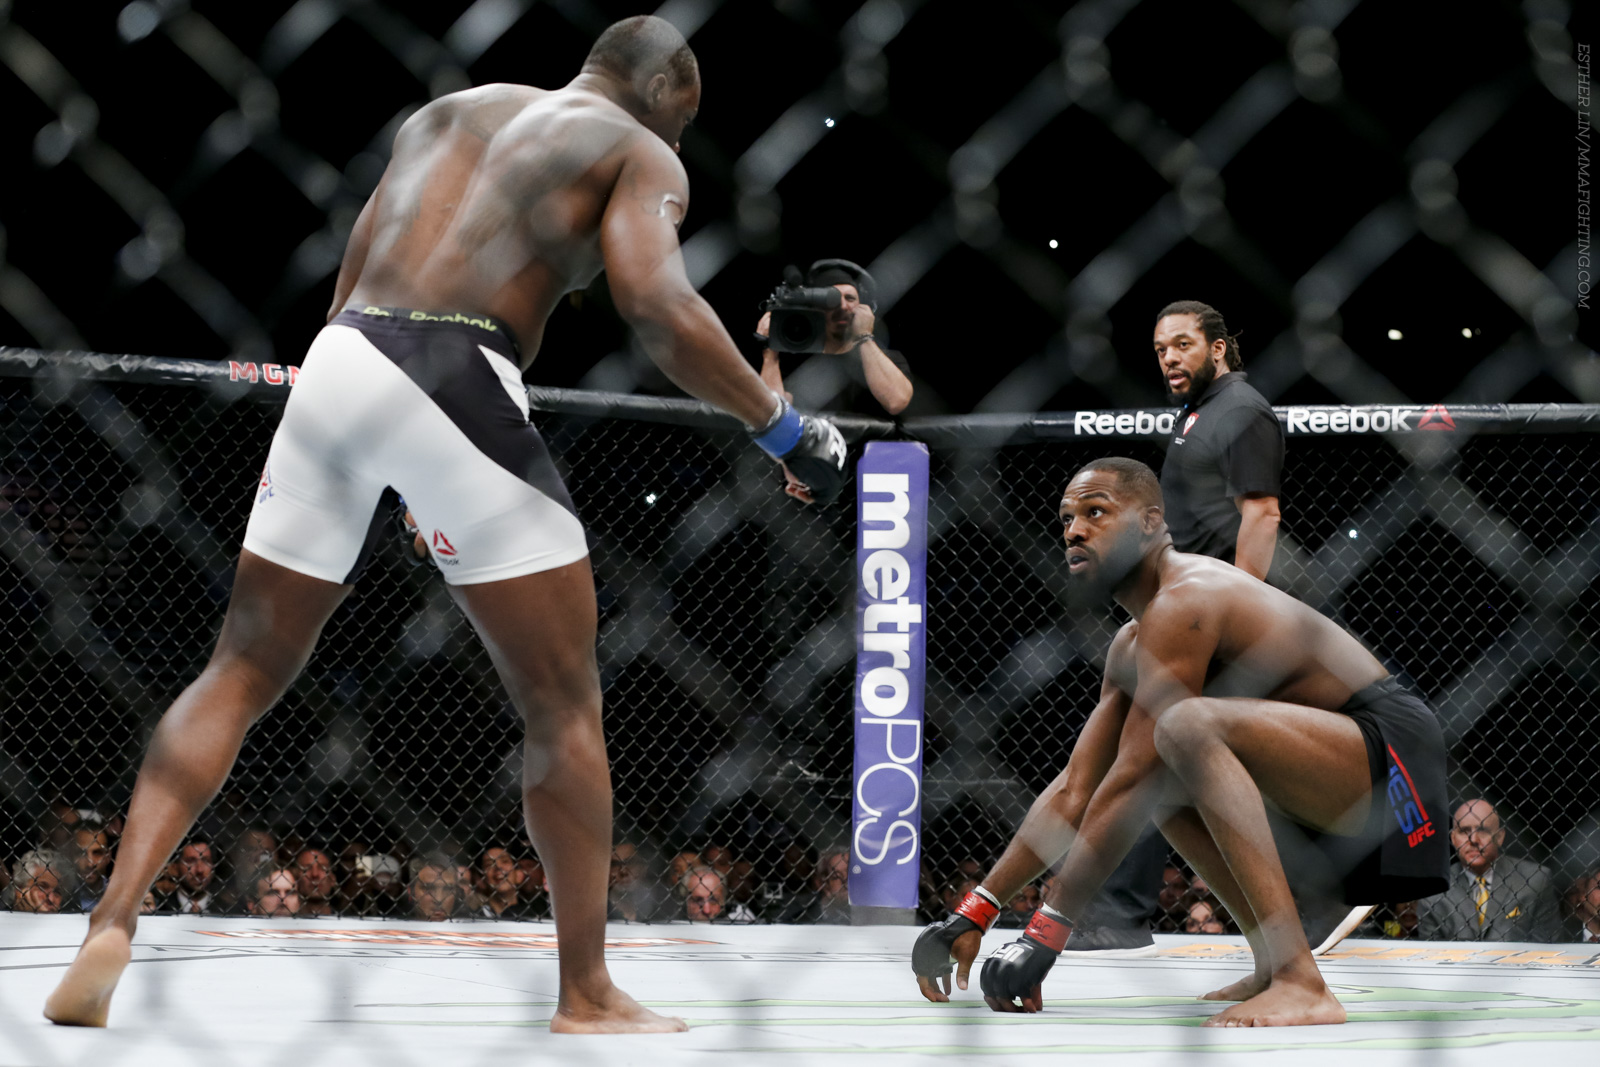 Jon Jones opens up Round 1 from his signature crouched position at UFC 197 ...